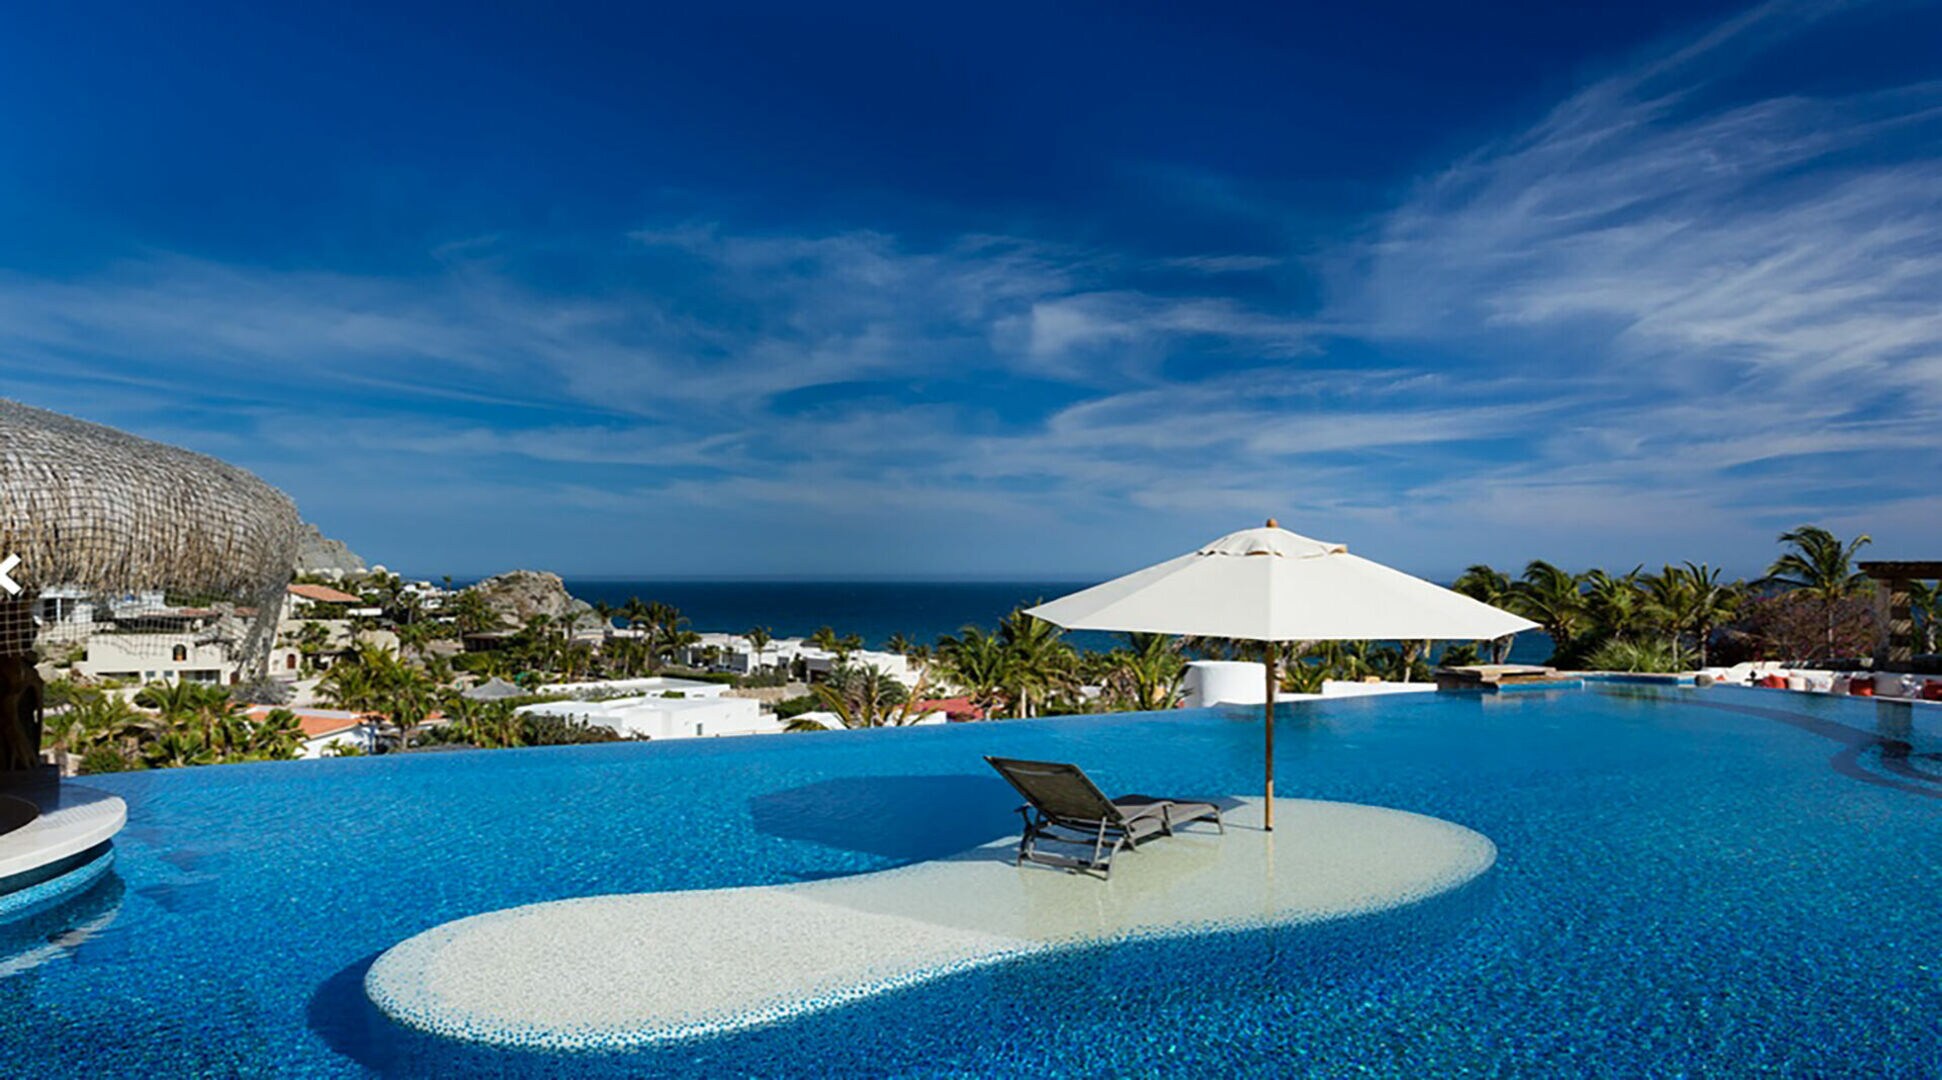 Property Image 2 - Beautiful Holiday Villa in a Prime Location in Cabo San Lucas, Book Early to Secure Your Dates,  Cabo San 